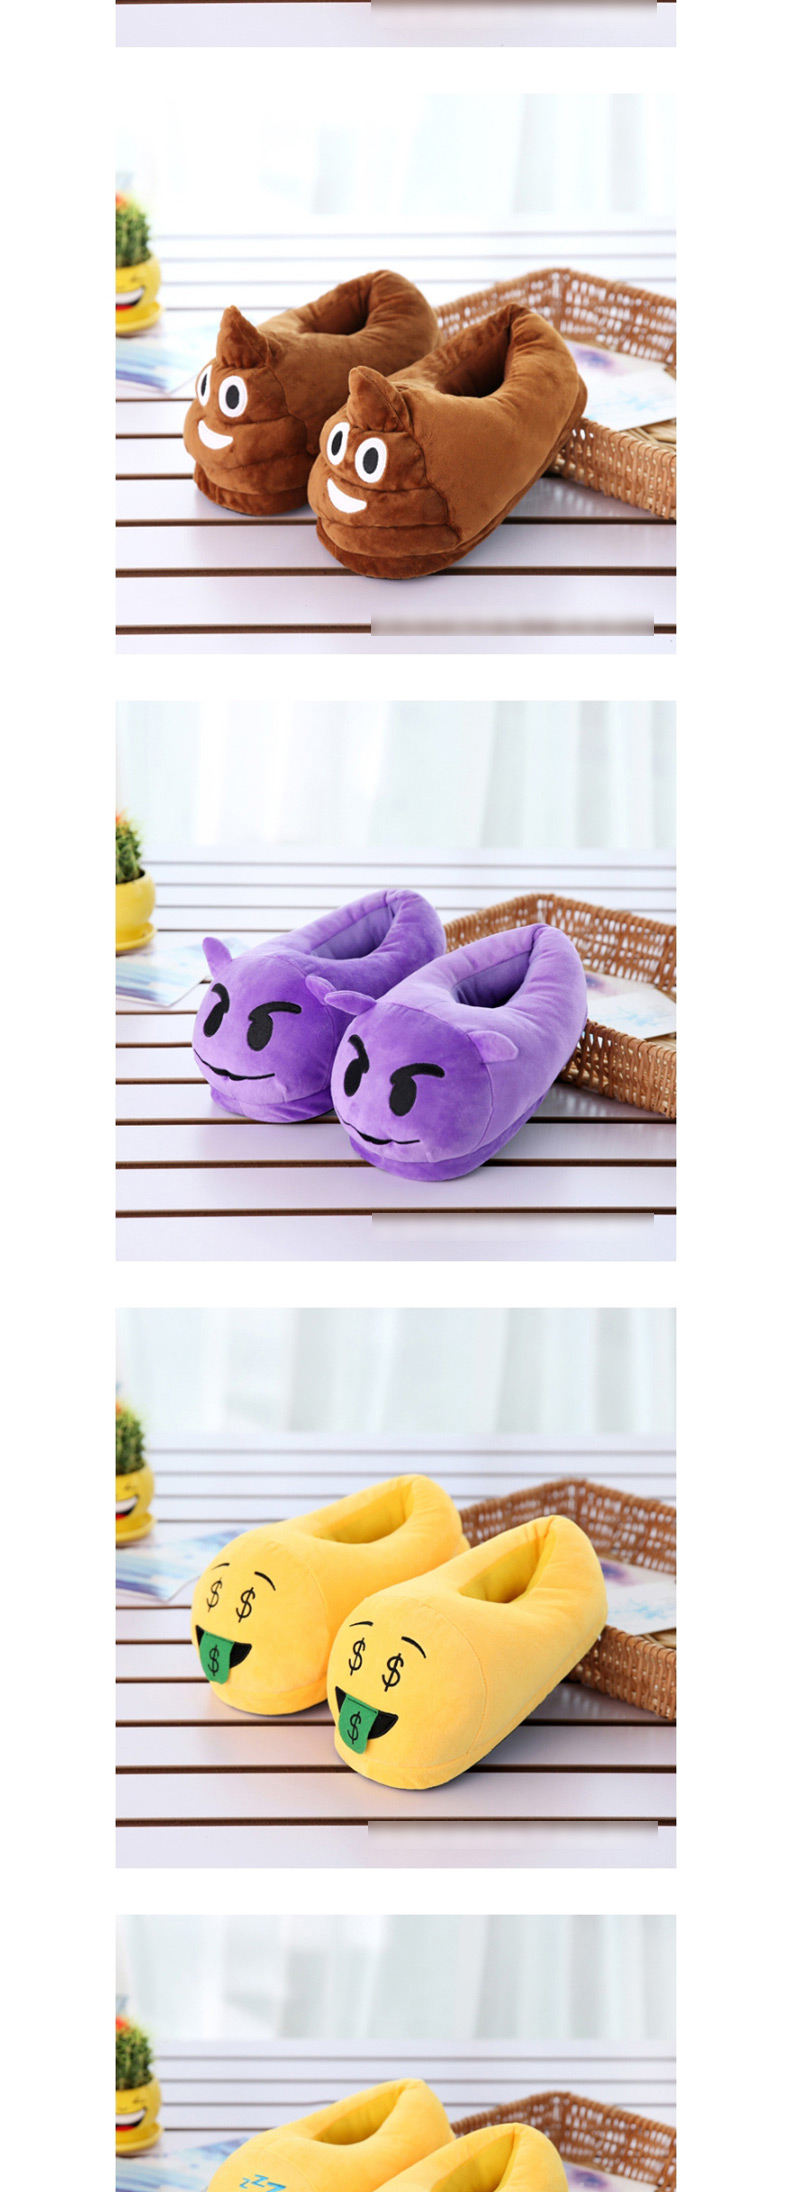 Fashion 16 Yellow Angry Cartoon Expression Plush Bag With Cotton Slippers,Slippers